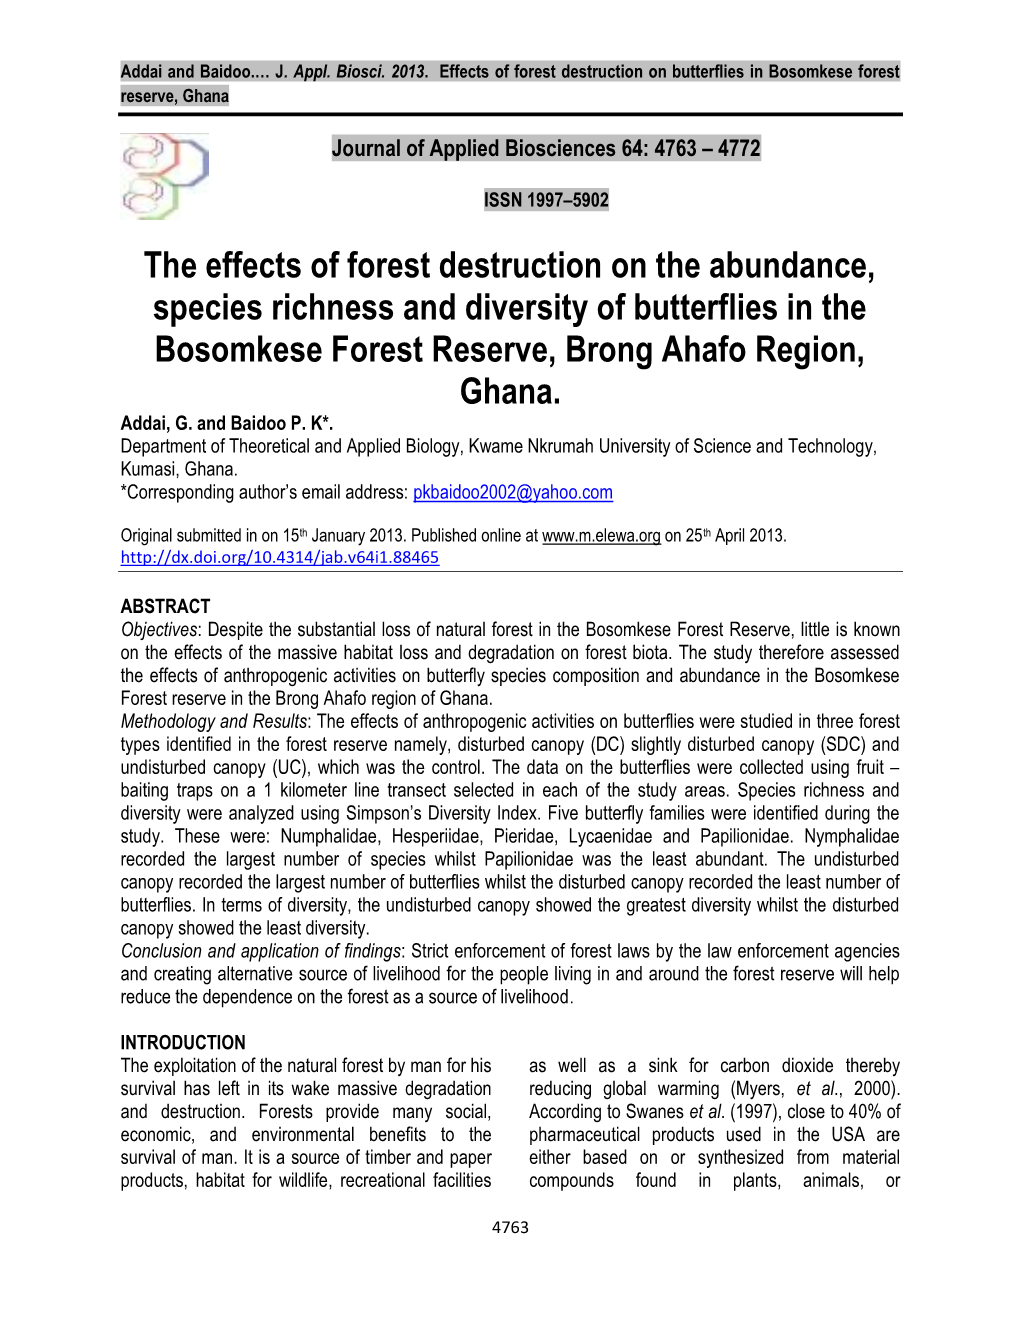 The Effects of Forest Destruction on the Abundance, Species Richness and Diversity of Butterflies in the Bosomkese Forest Reserve, Brong Ahafo Region, Ghana